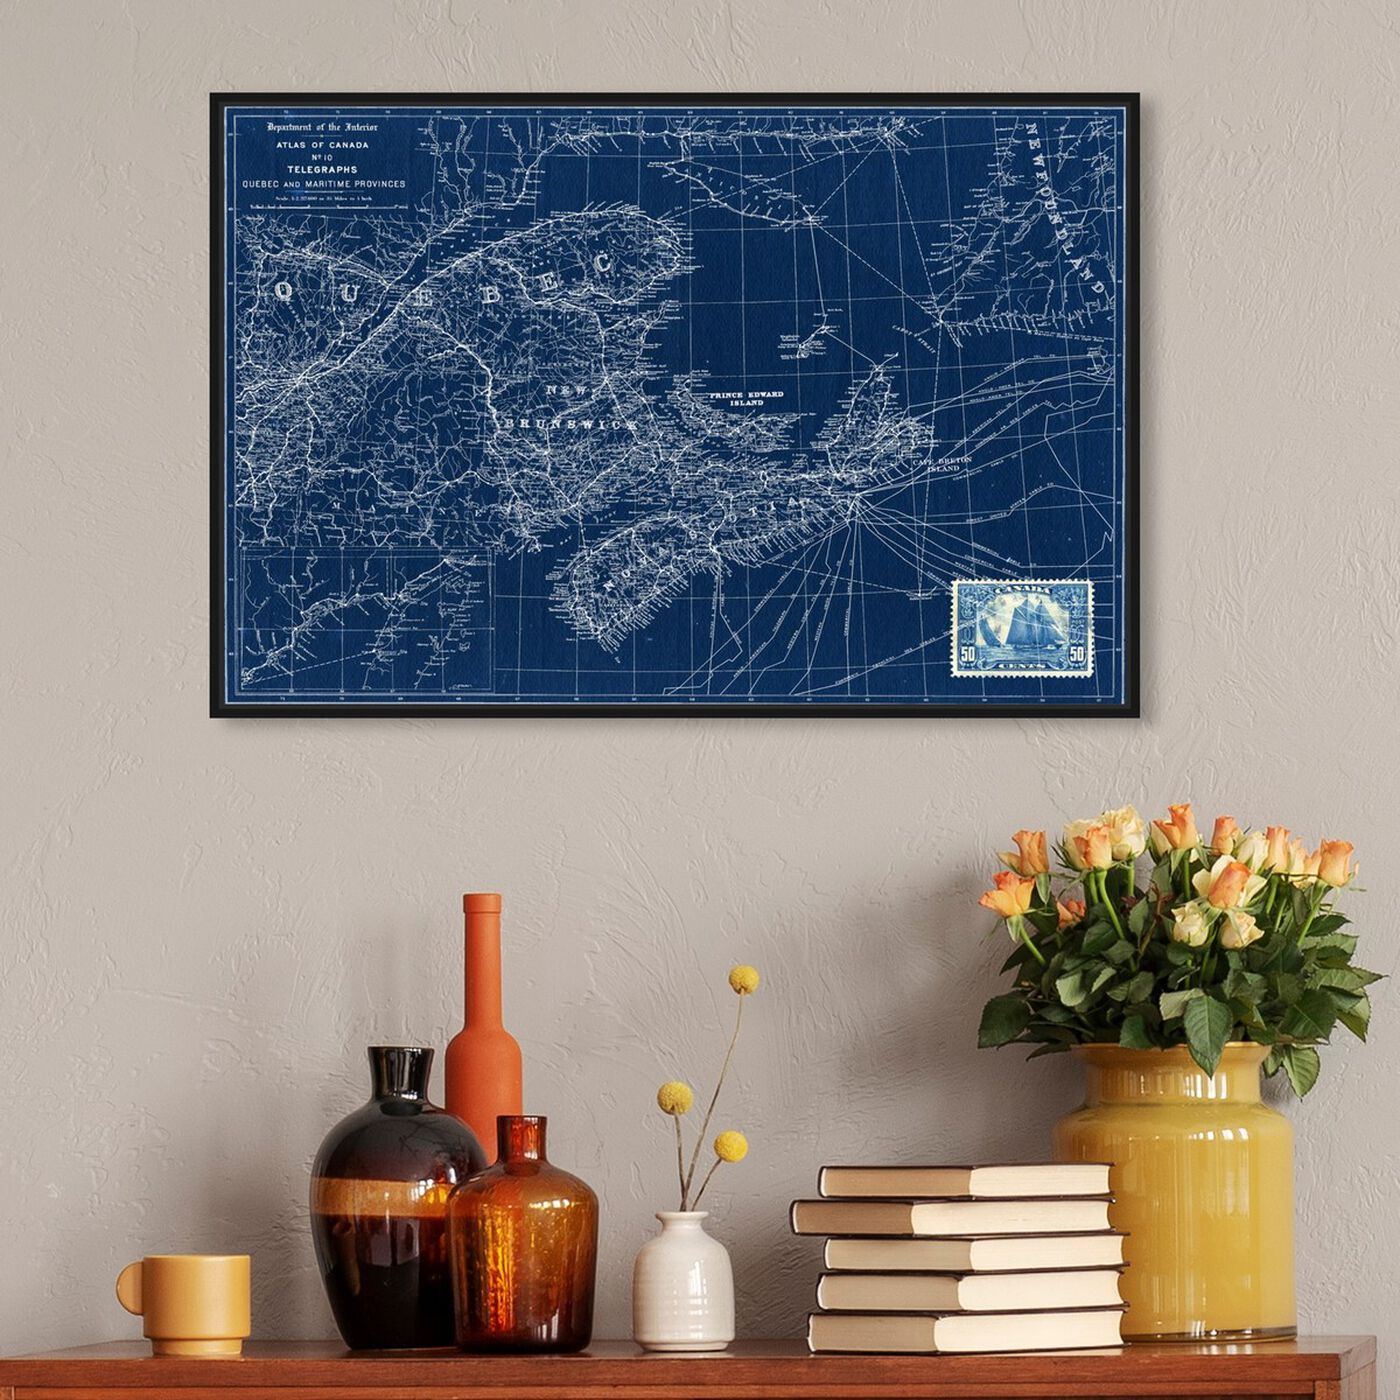 Hanging view of Quebec Maritime Provinces Map 1906 featuring cities and skylines and north american cities art.